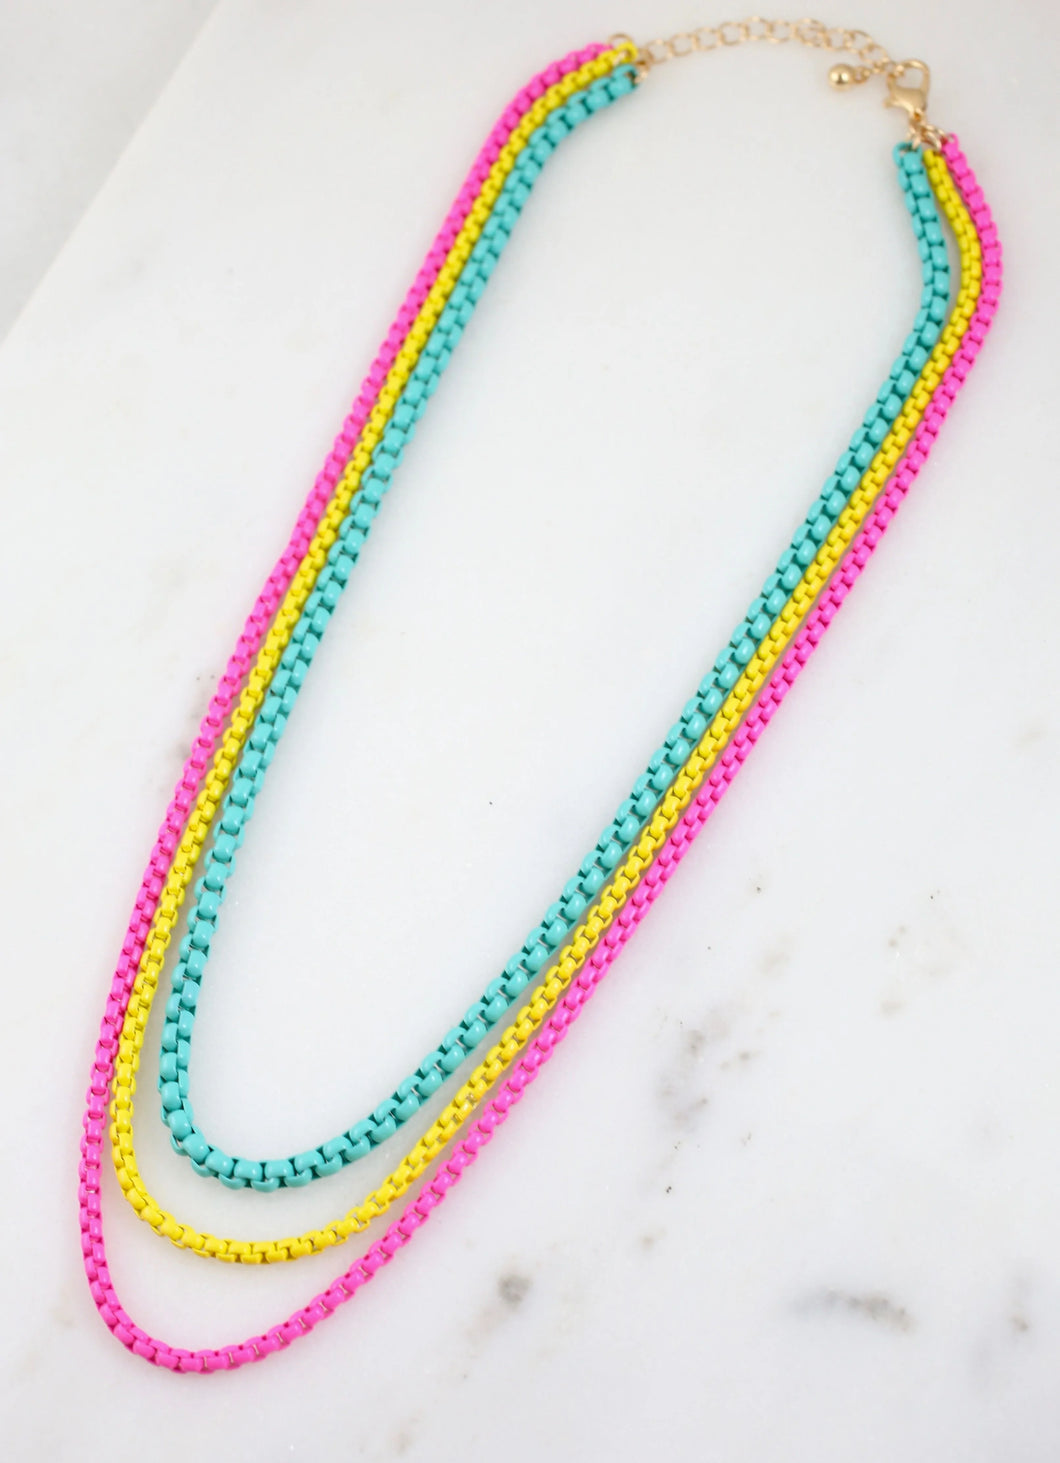 Frankie Neon Layered Necklace